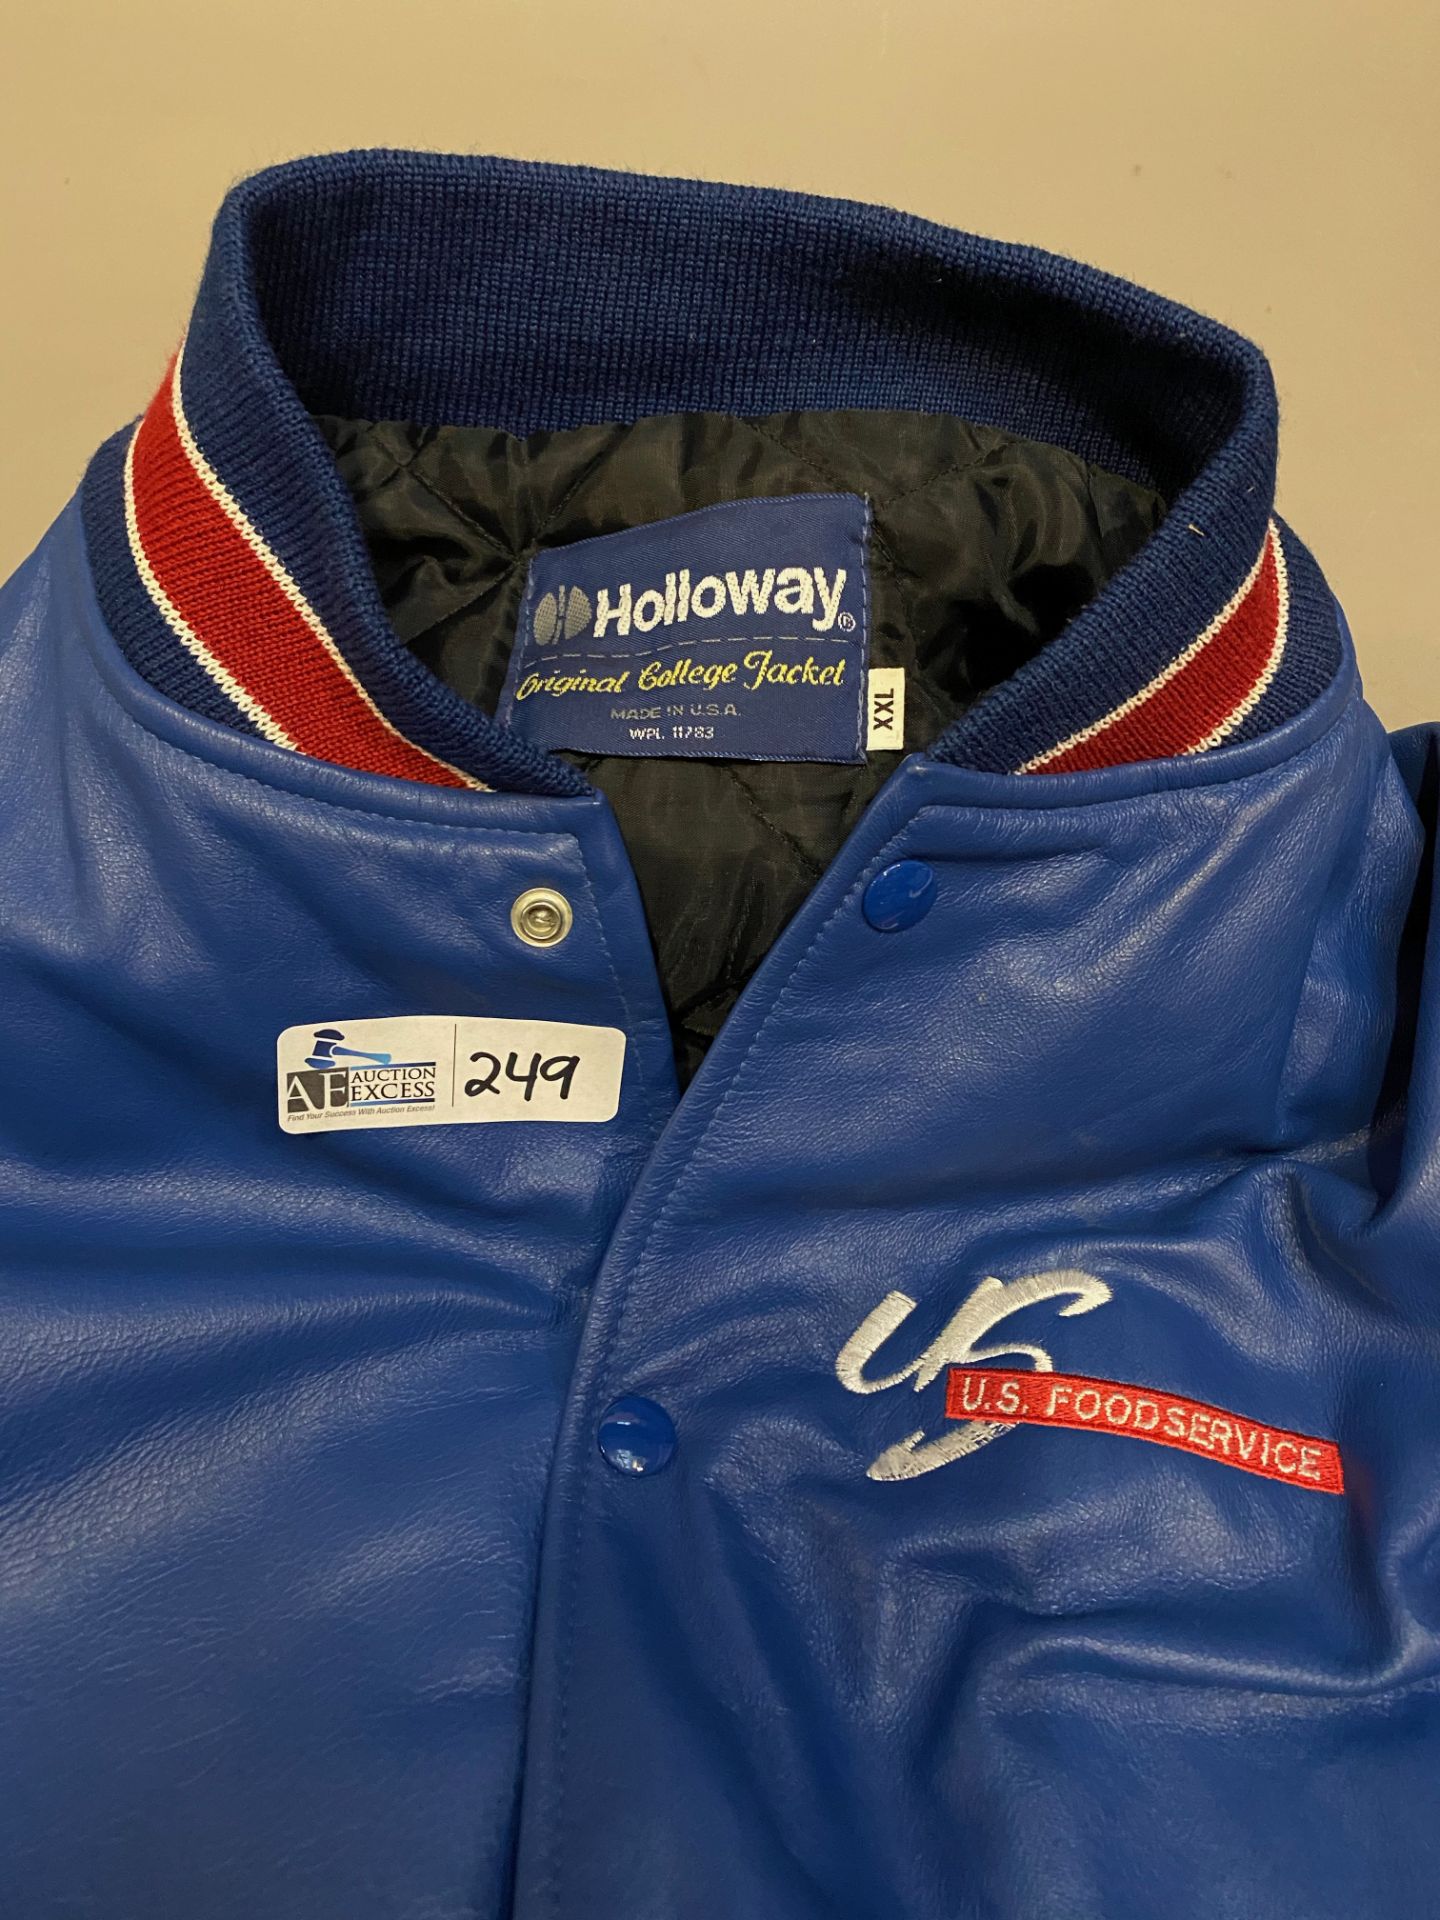 HOLLOWAY COLLEGE JACKET - Image 2 of 3